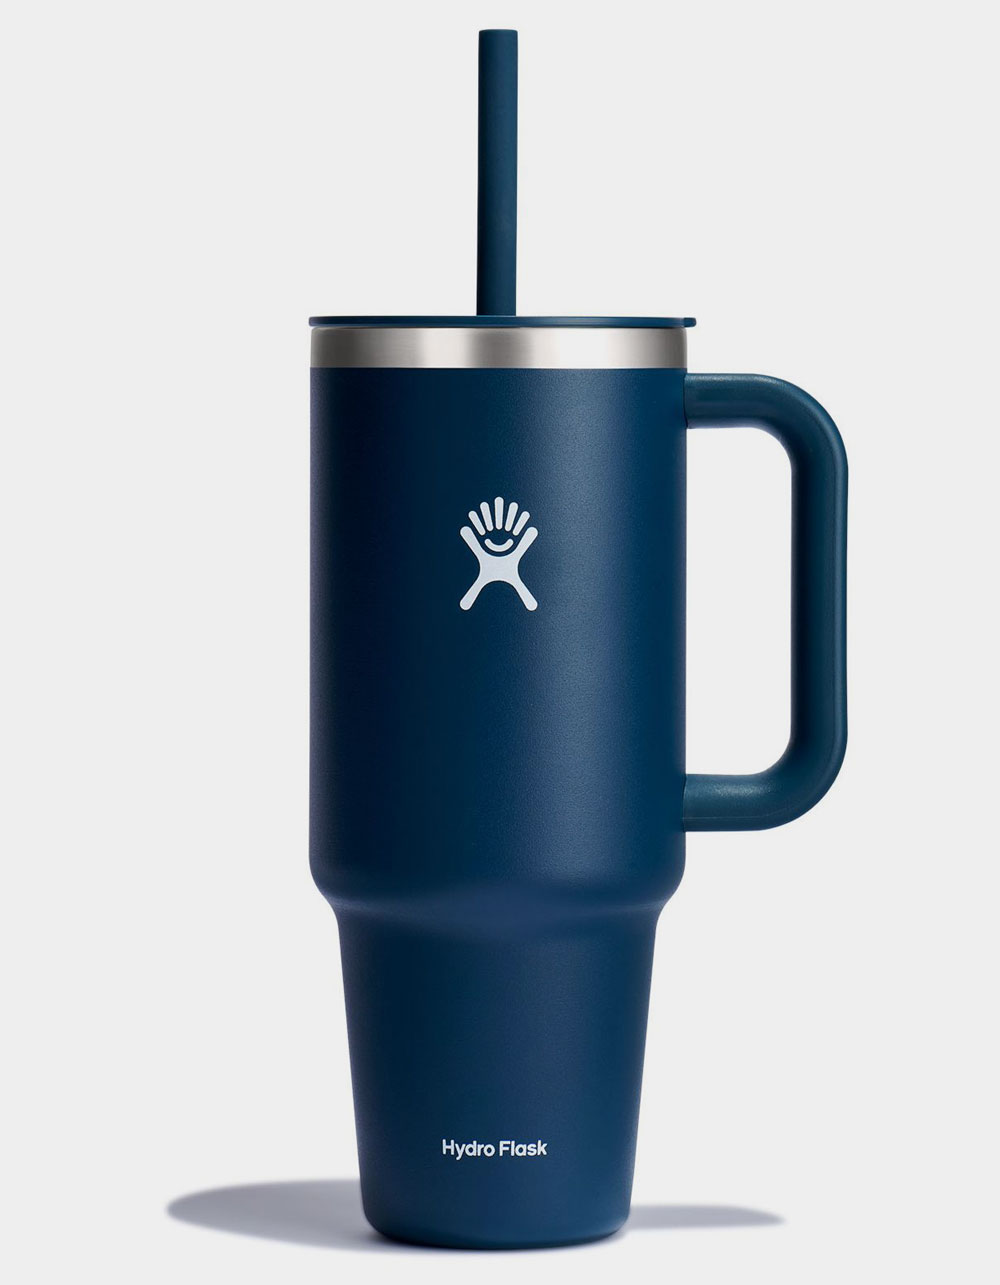 Hydro Flask Coffee Mug Review: 'Hot' Gifts For Outdoor Lovers!